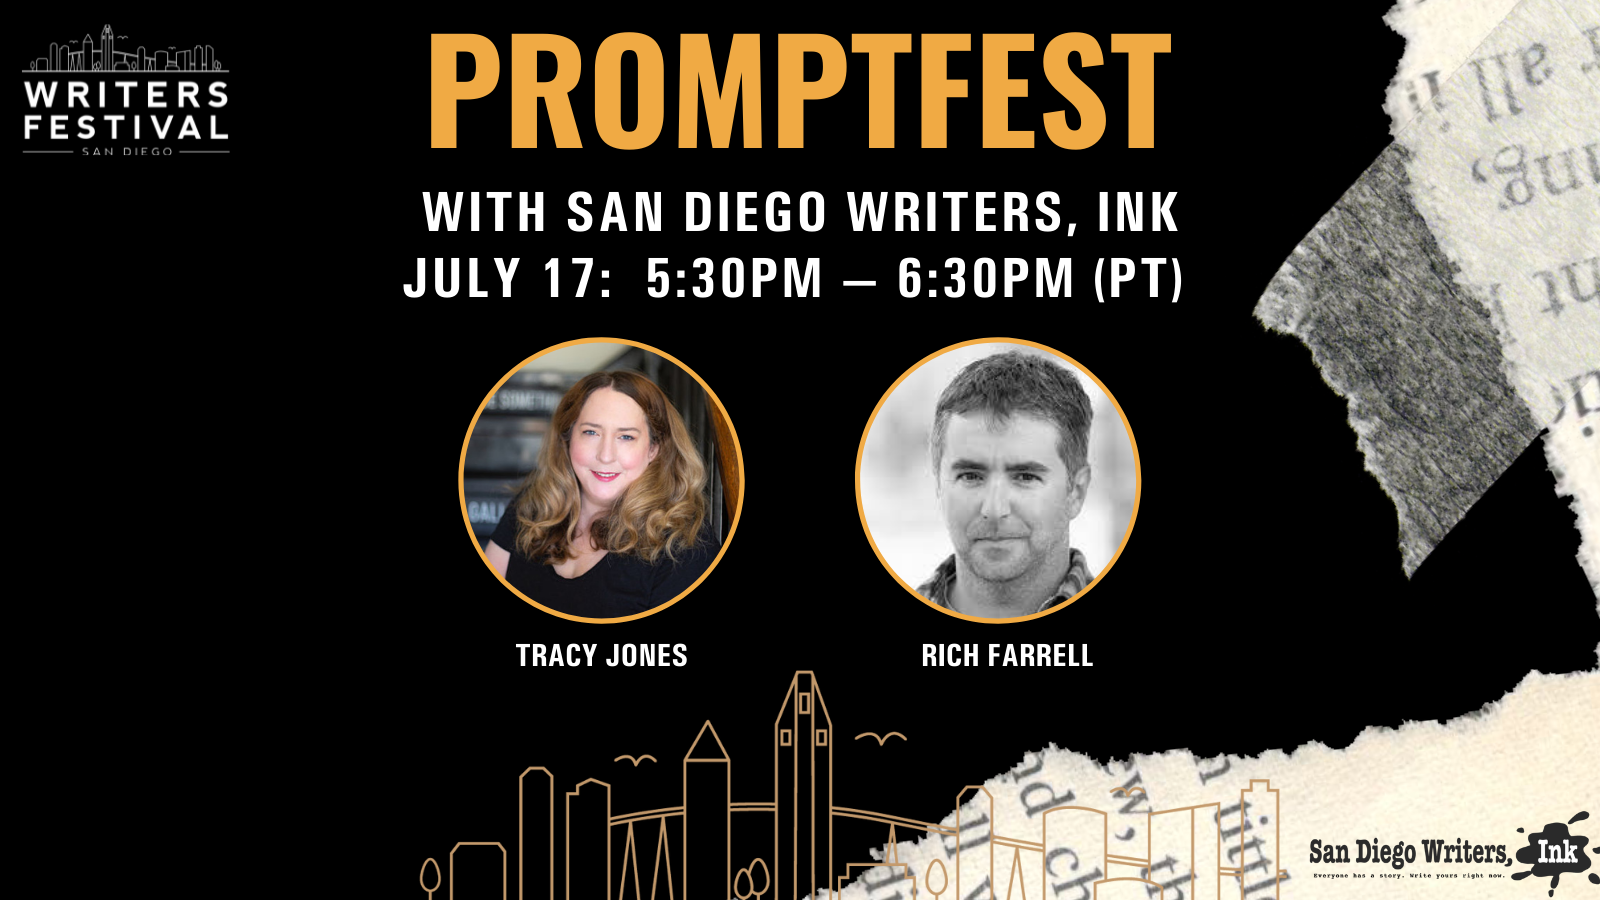 SDWI Presents PromptFest San Diego Writers Festival